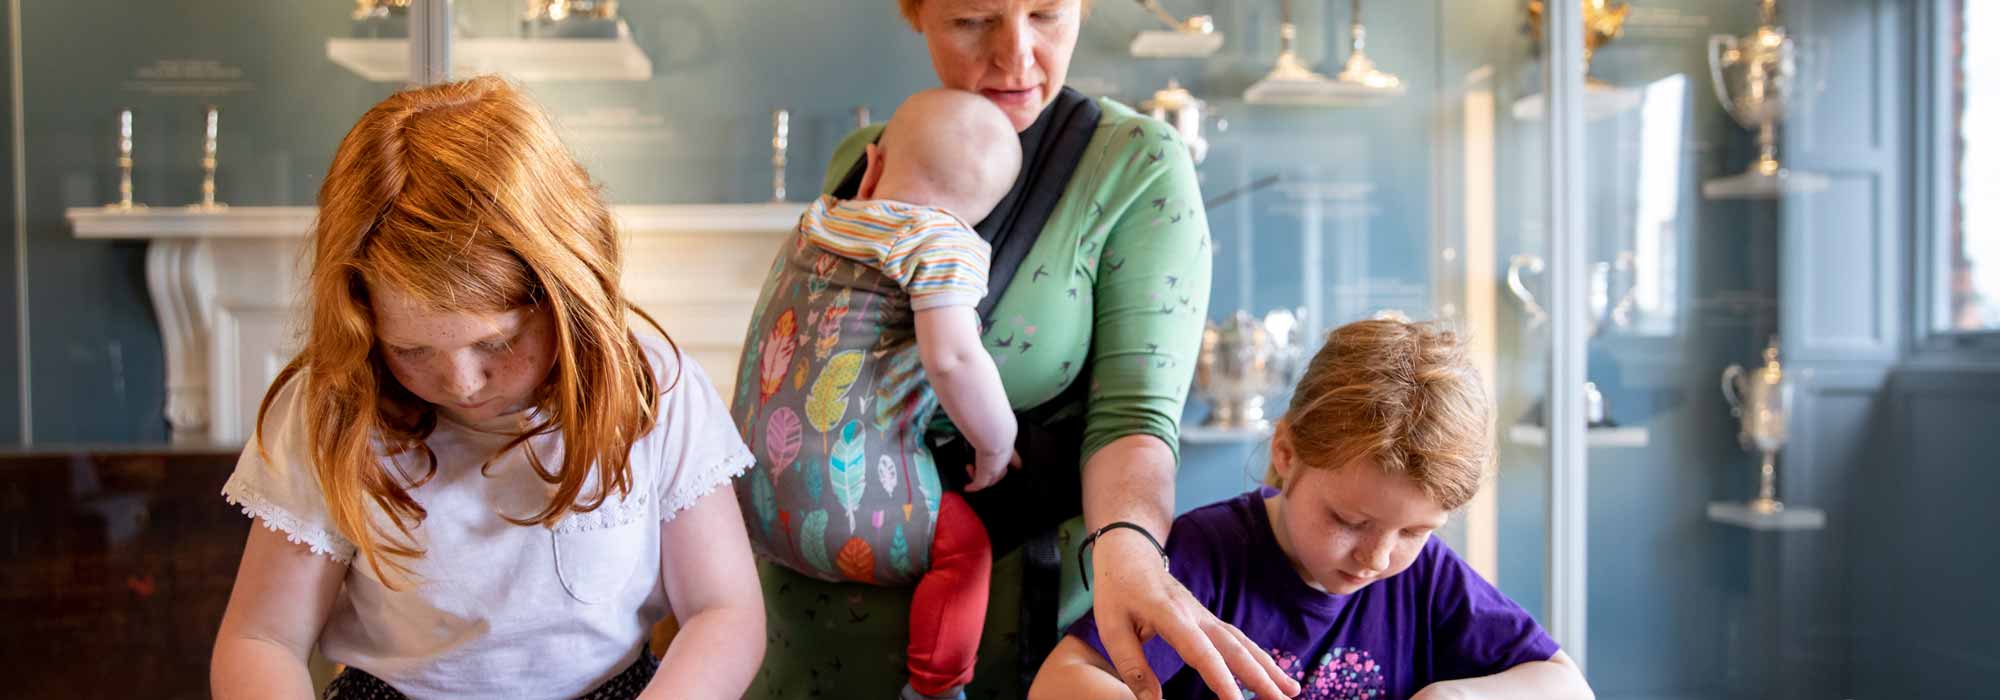 Two young children complete a task whilst a woman in a green shirt with a baby in a baby carrier supervises them